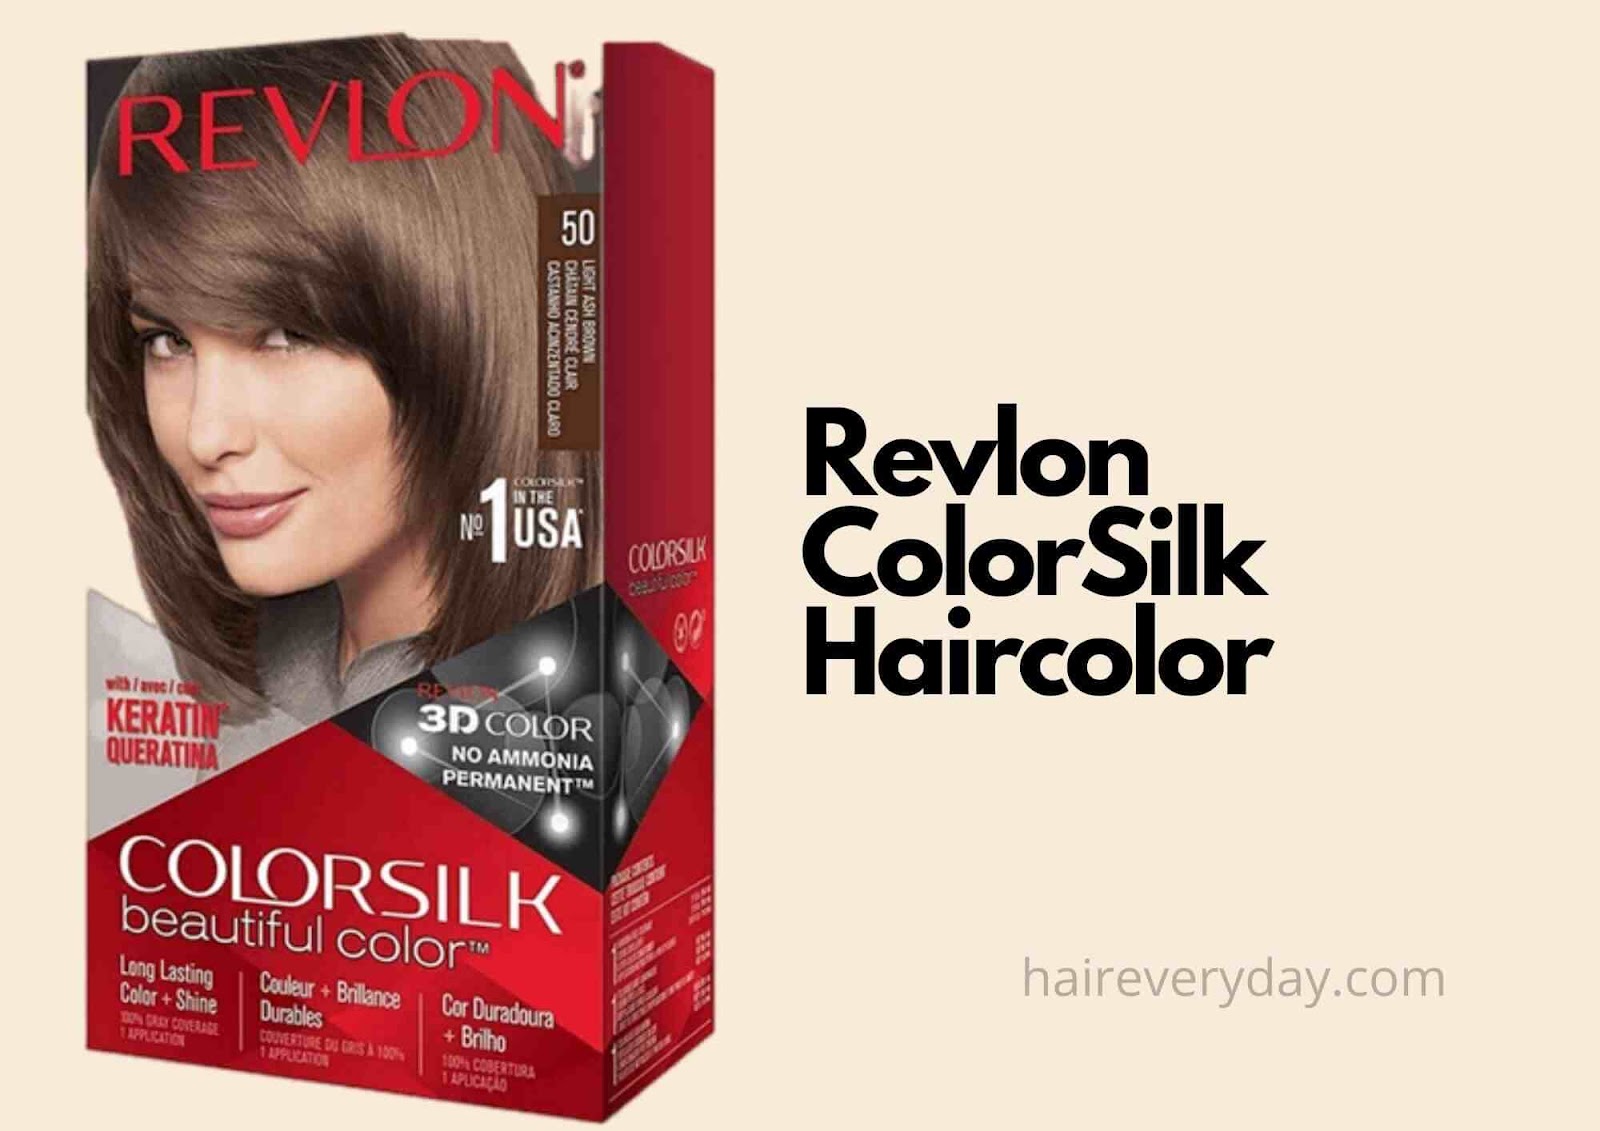 7 Best Ash Brown Hair Dye 2023 | Hair Color Ideas You Have To Try - Hair  Everyday Review